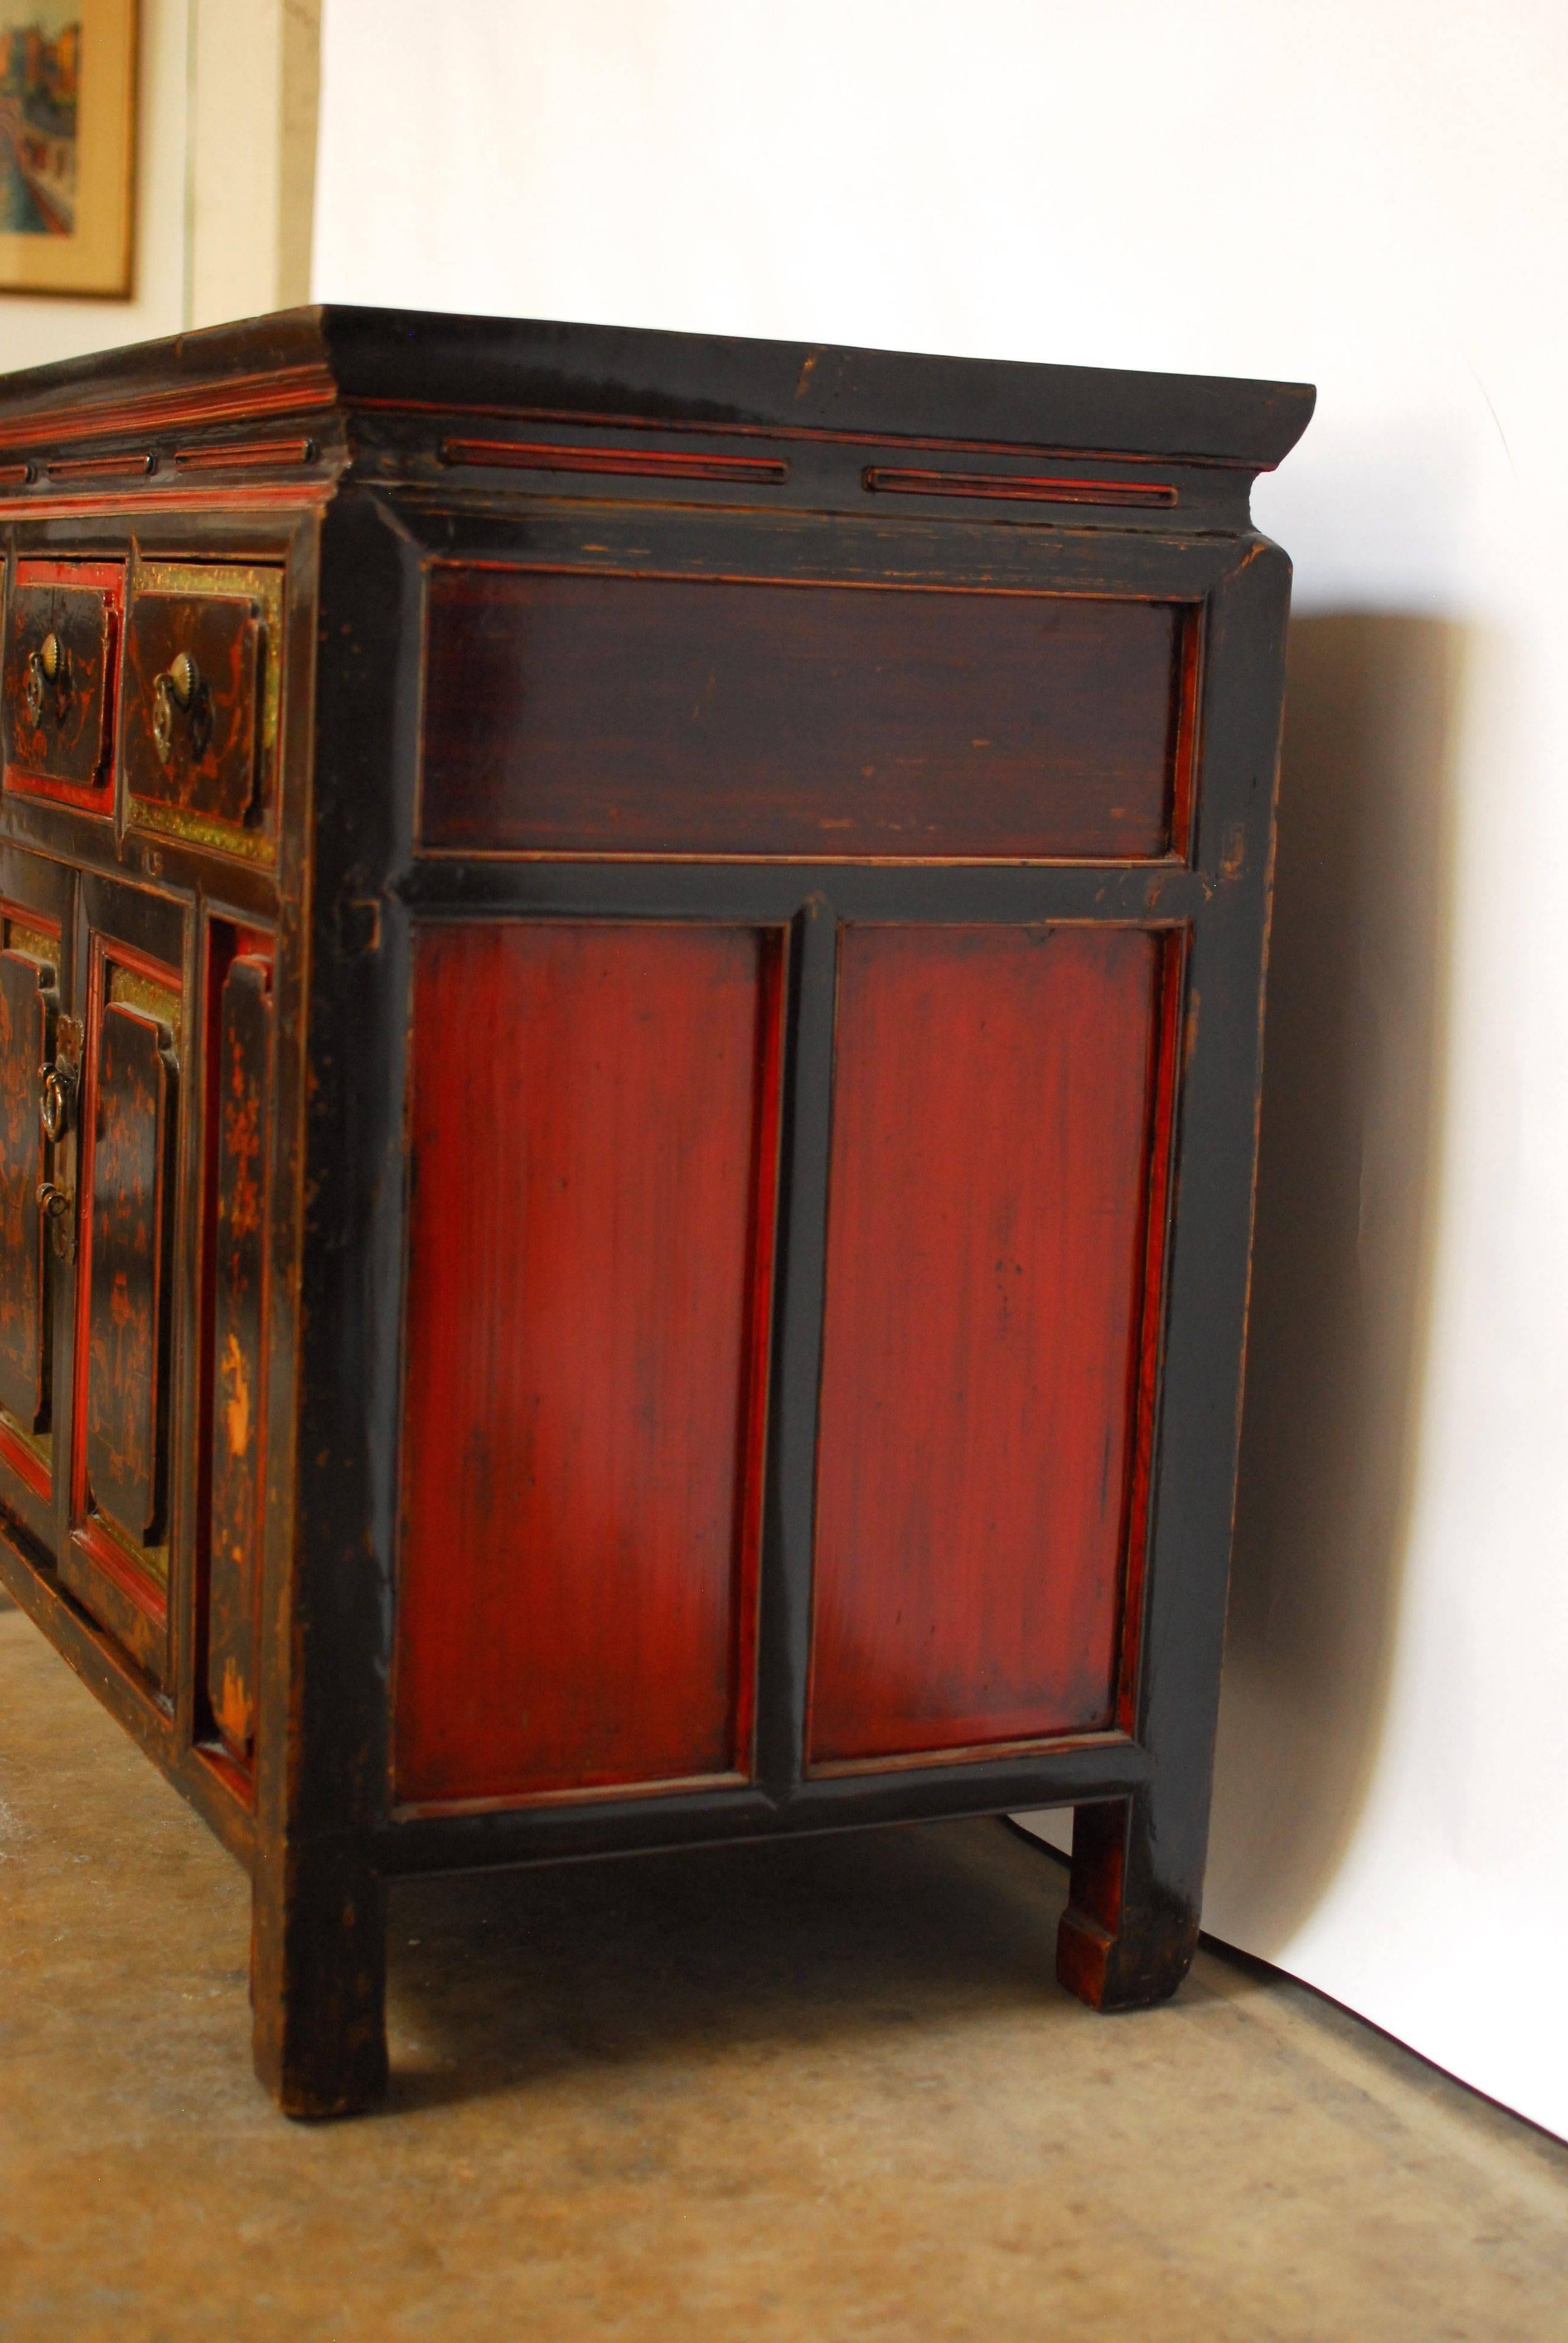 An antique, Chinese black and red lacquer sideboard buffet cabinet with a polychrome decorated case fronted by three drawers and two large doors below that open to large storage area with two shelves. Featuring hand-painted scenes of vases, flowers,